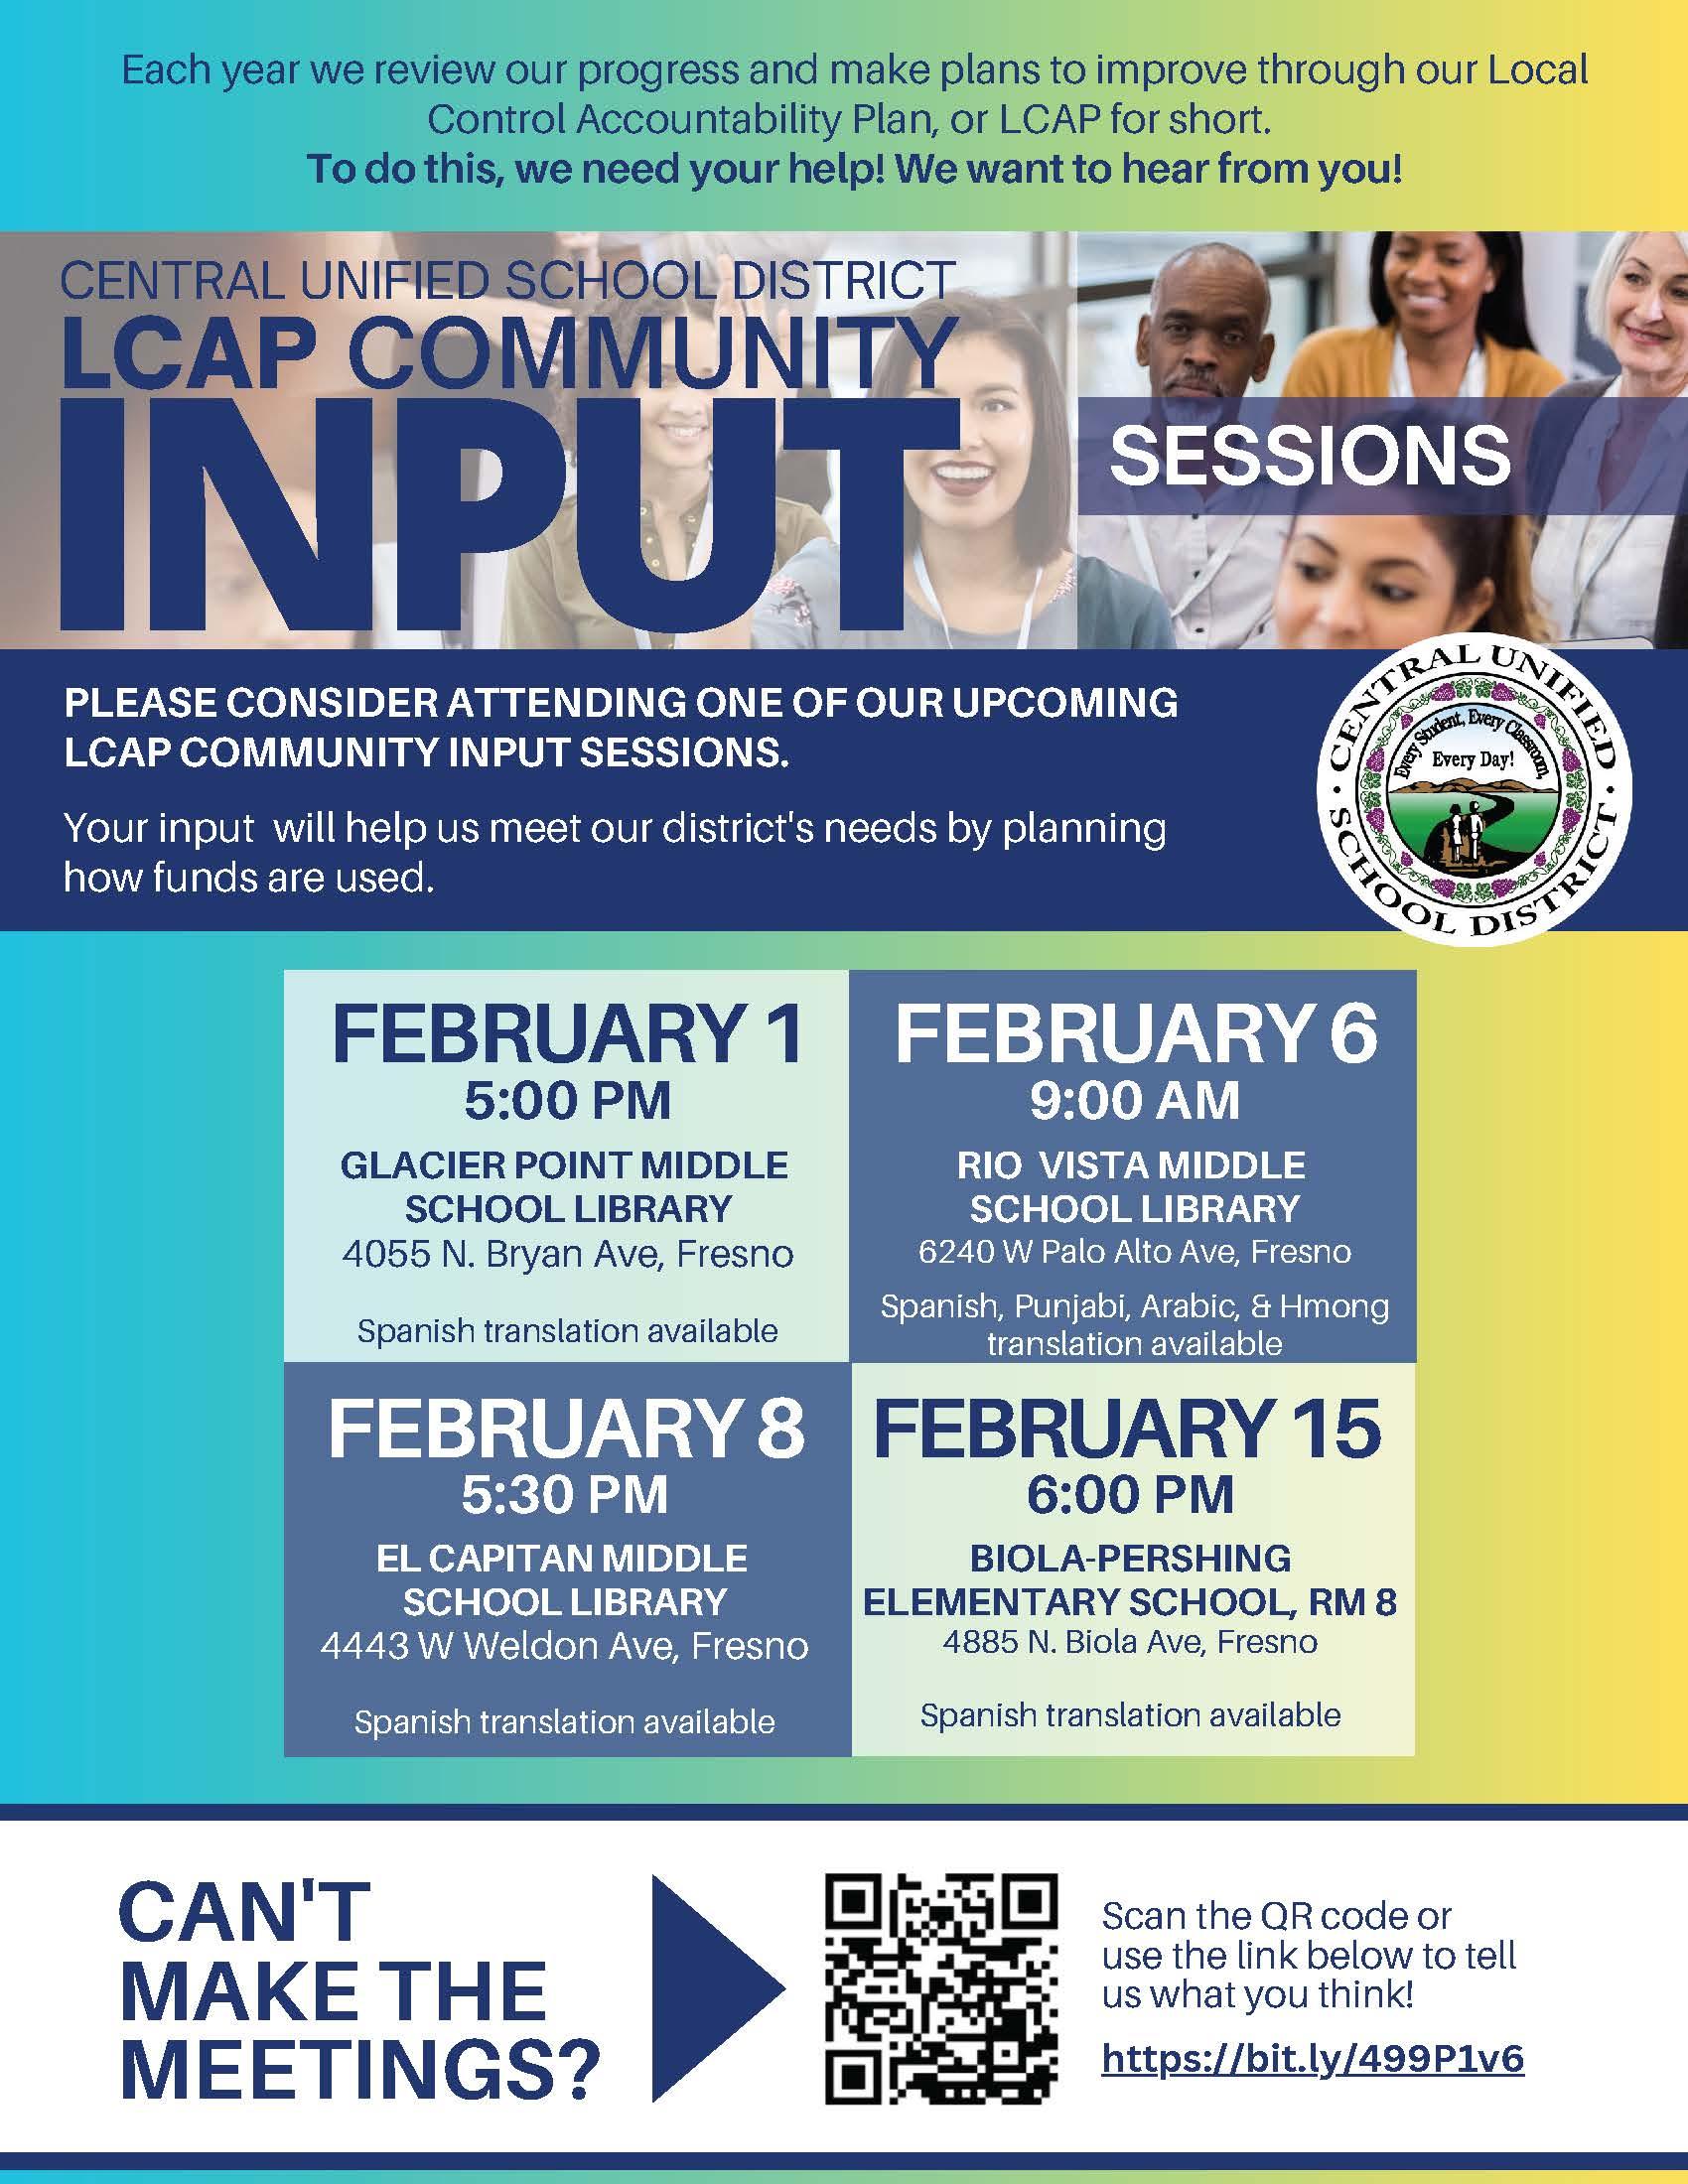 Local Control Accountability Plan (LCAP) Community Input Sessions